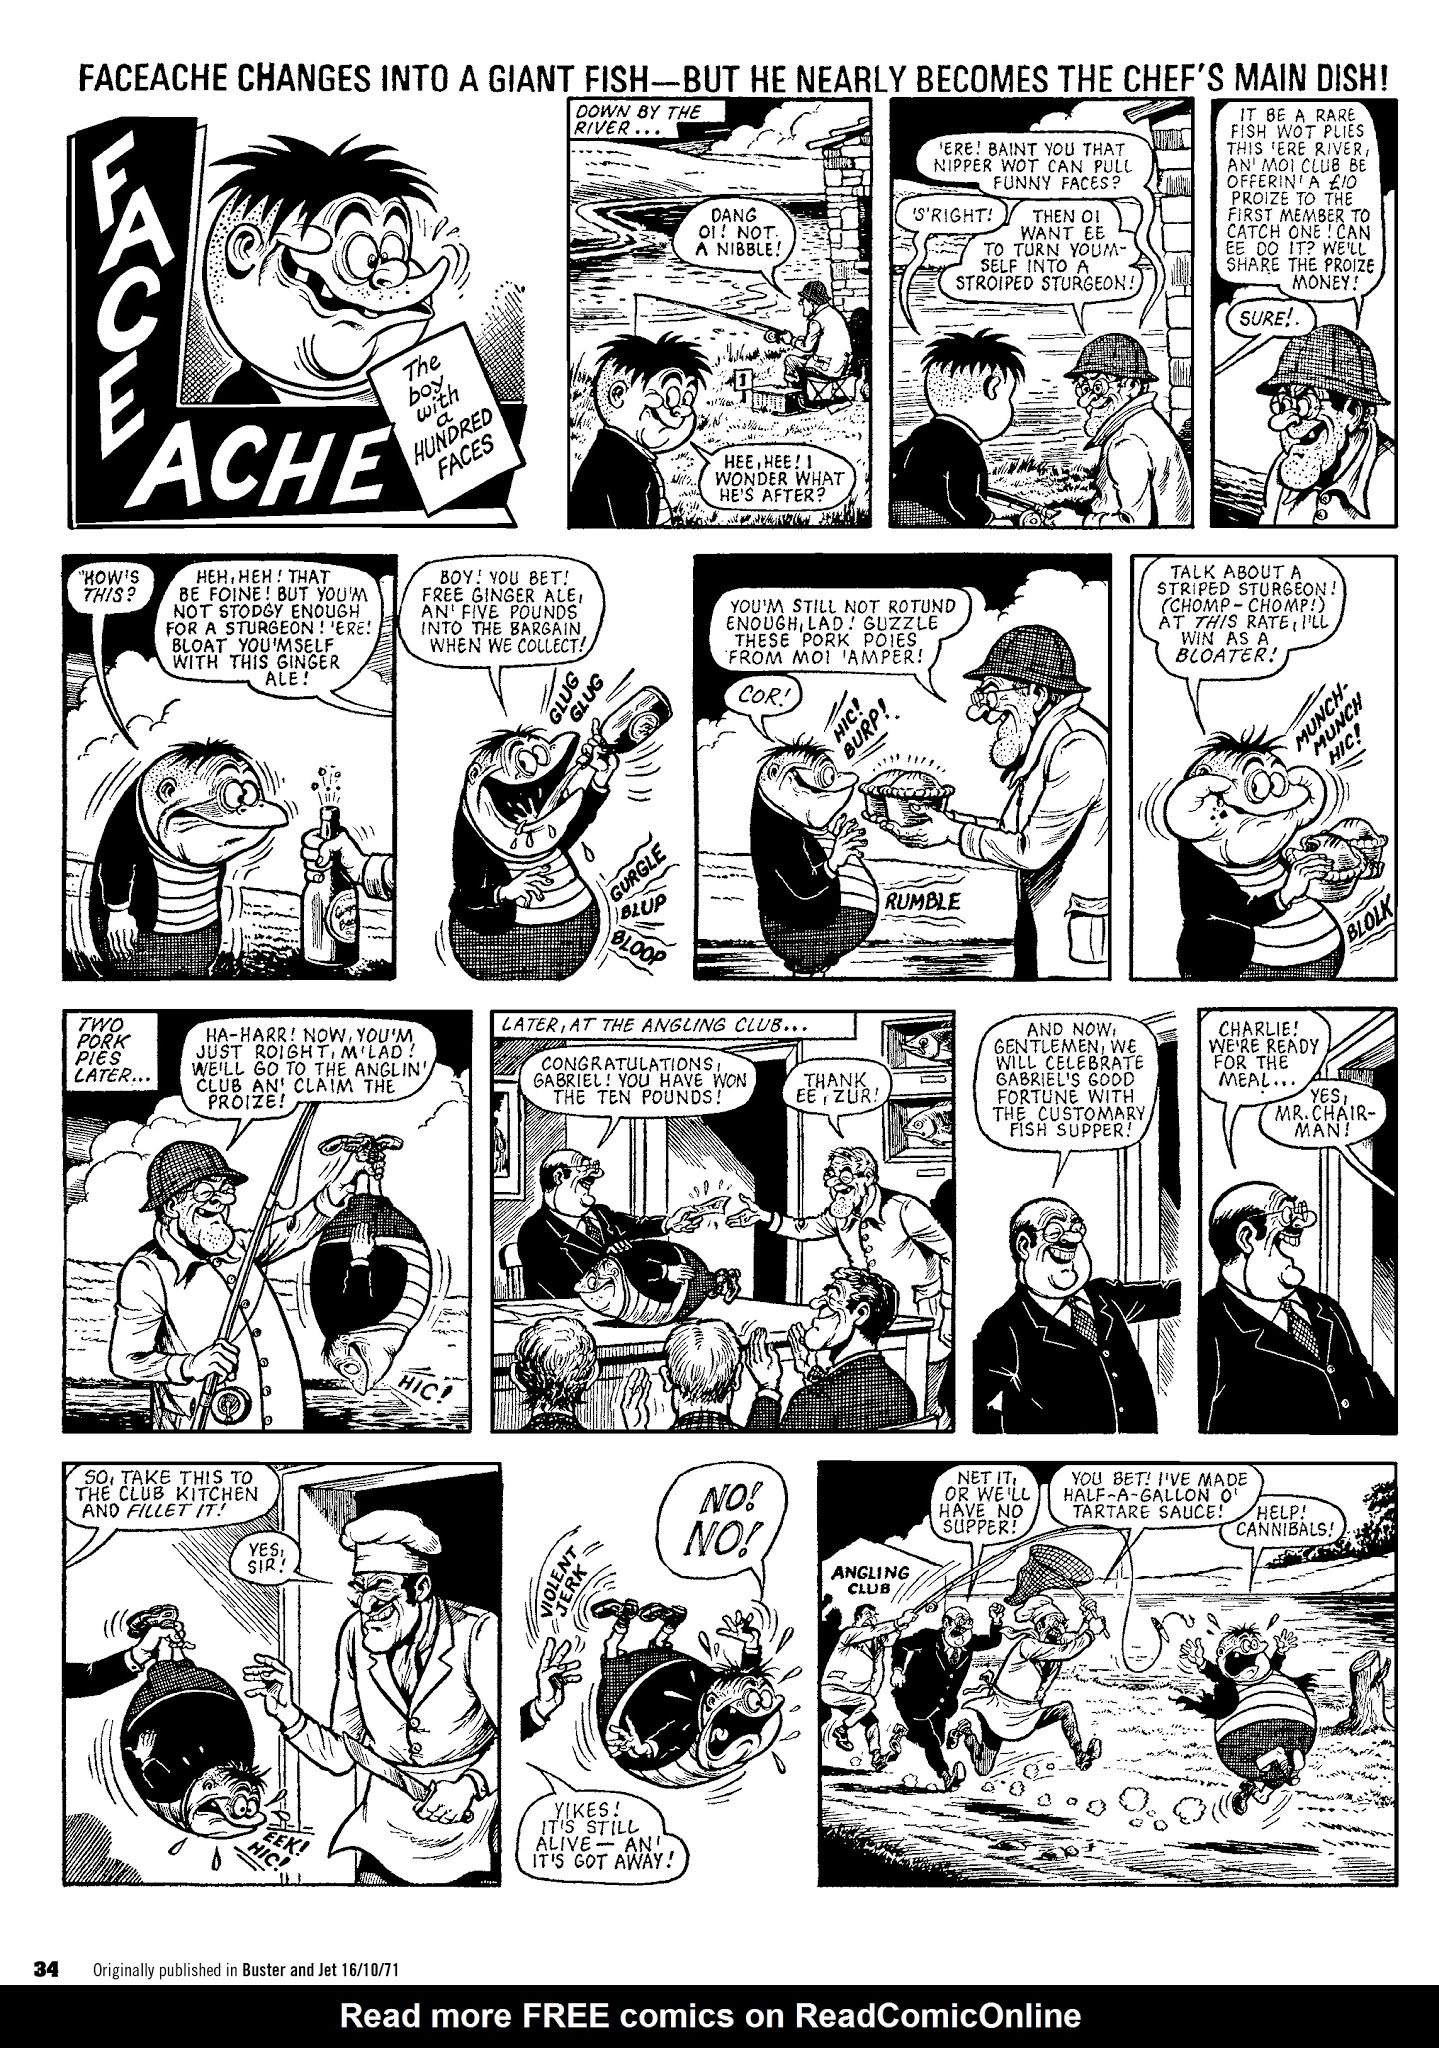 Read online Faceache: The First Hundred Scrunges comic -  Issue # TPB 1 - 36